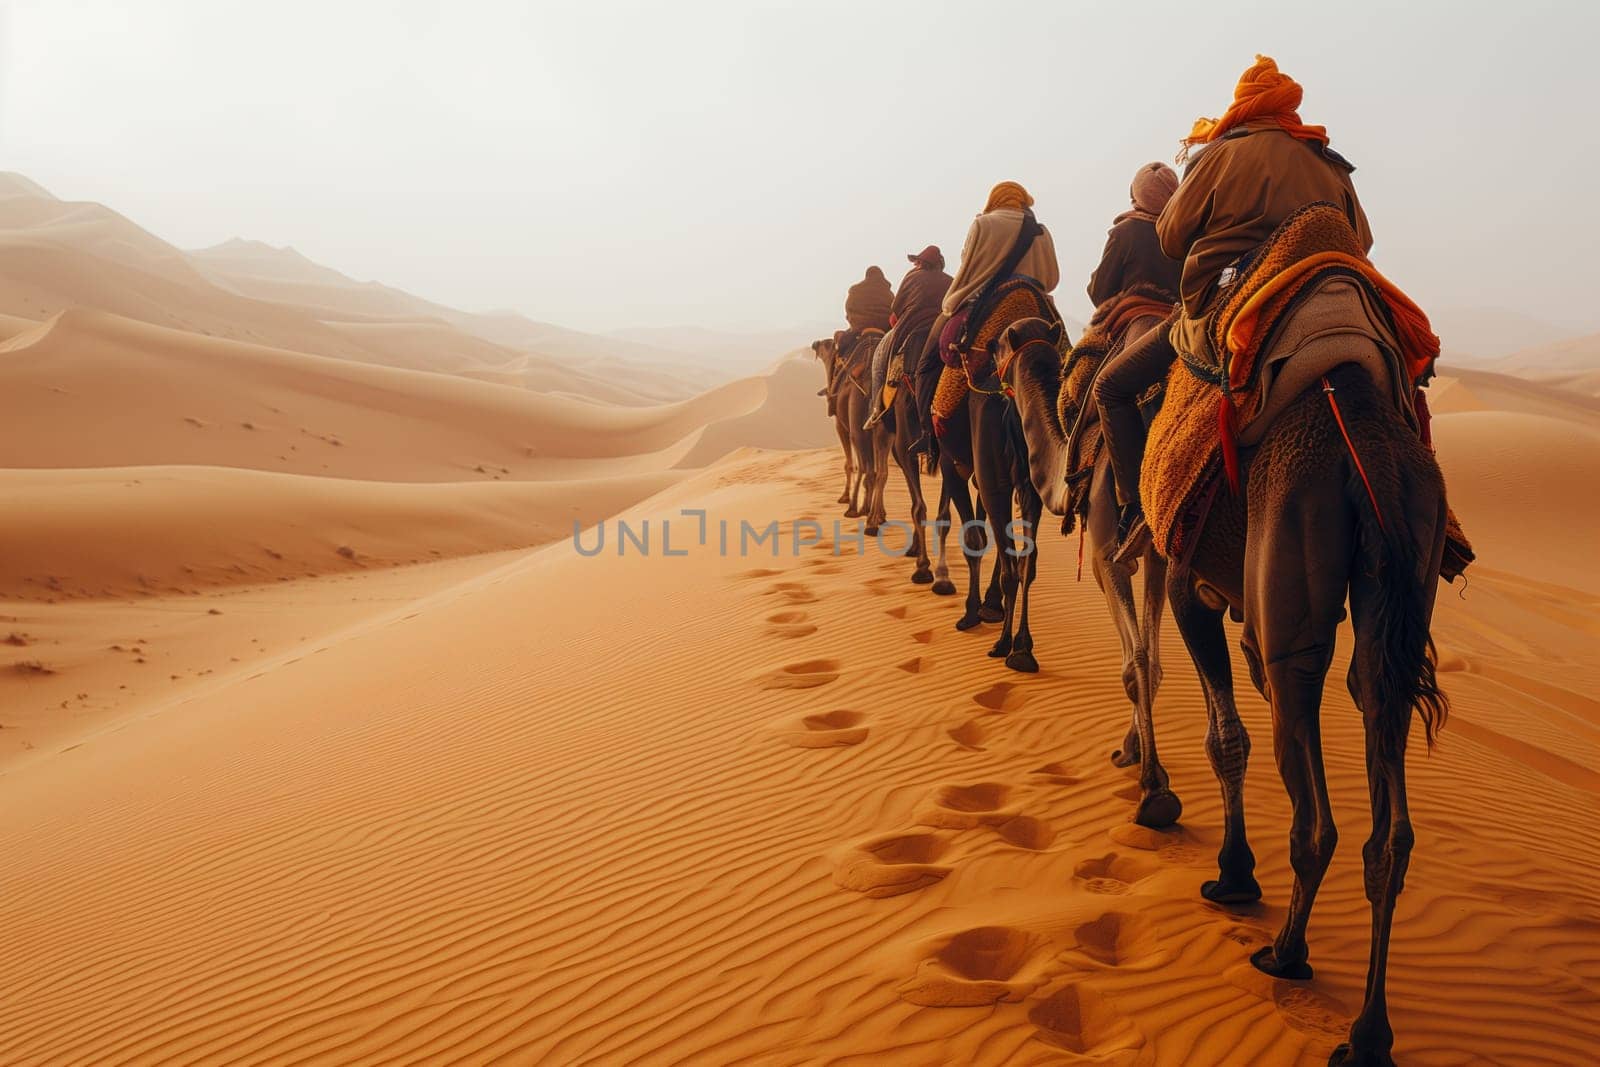 A group of travelers journey through the desert on camels, experiencing the vast landscapes and singing sands under the open sky